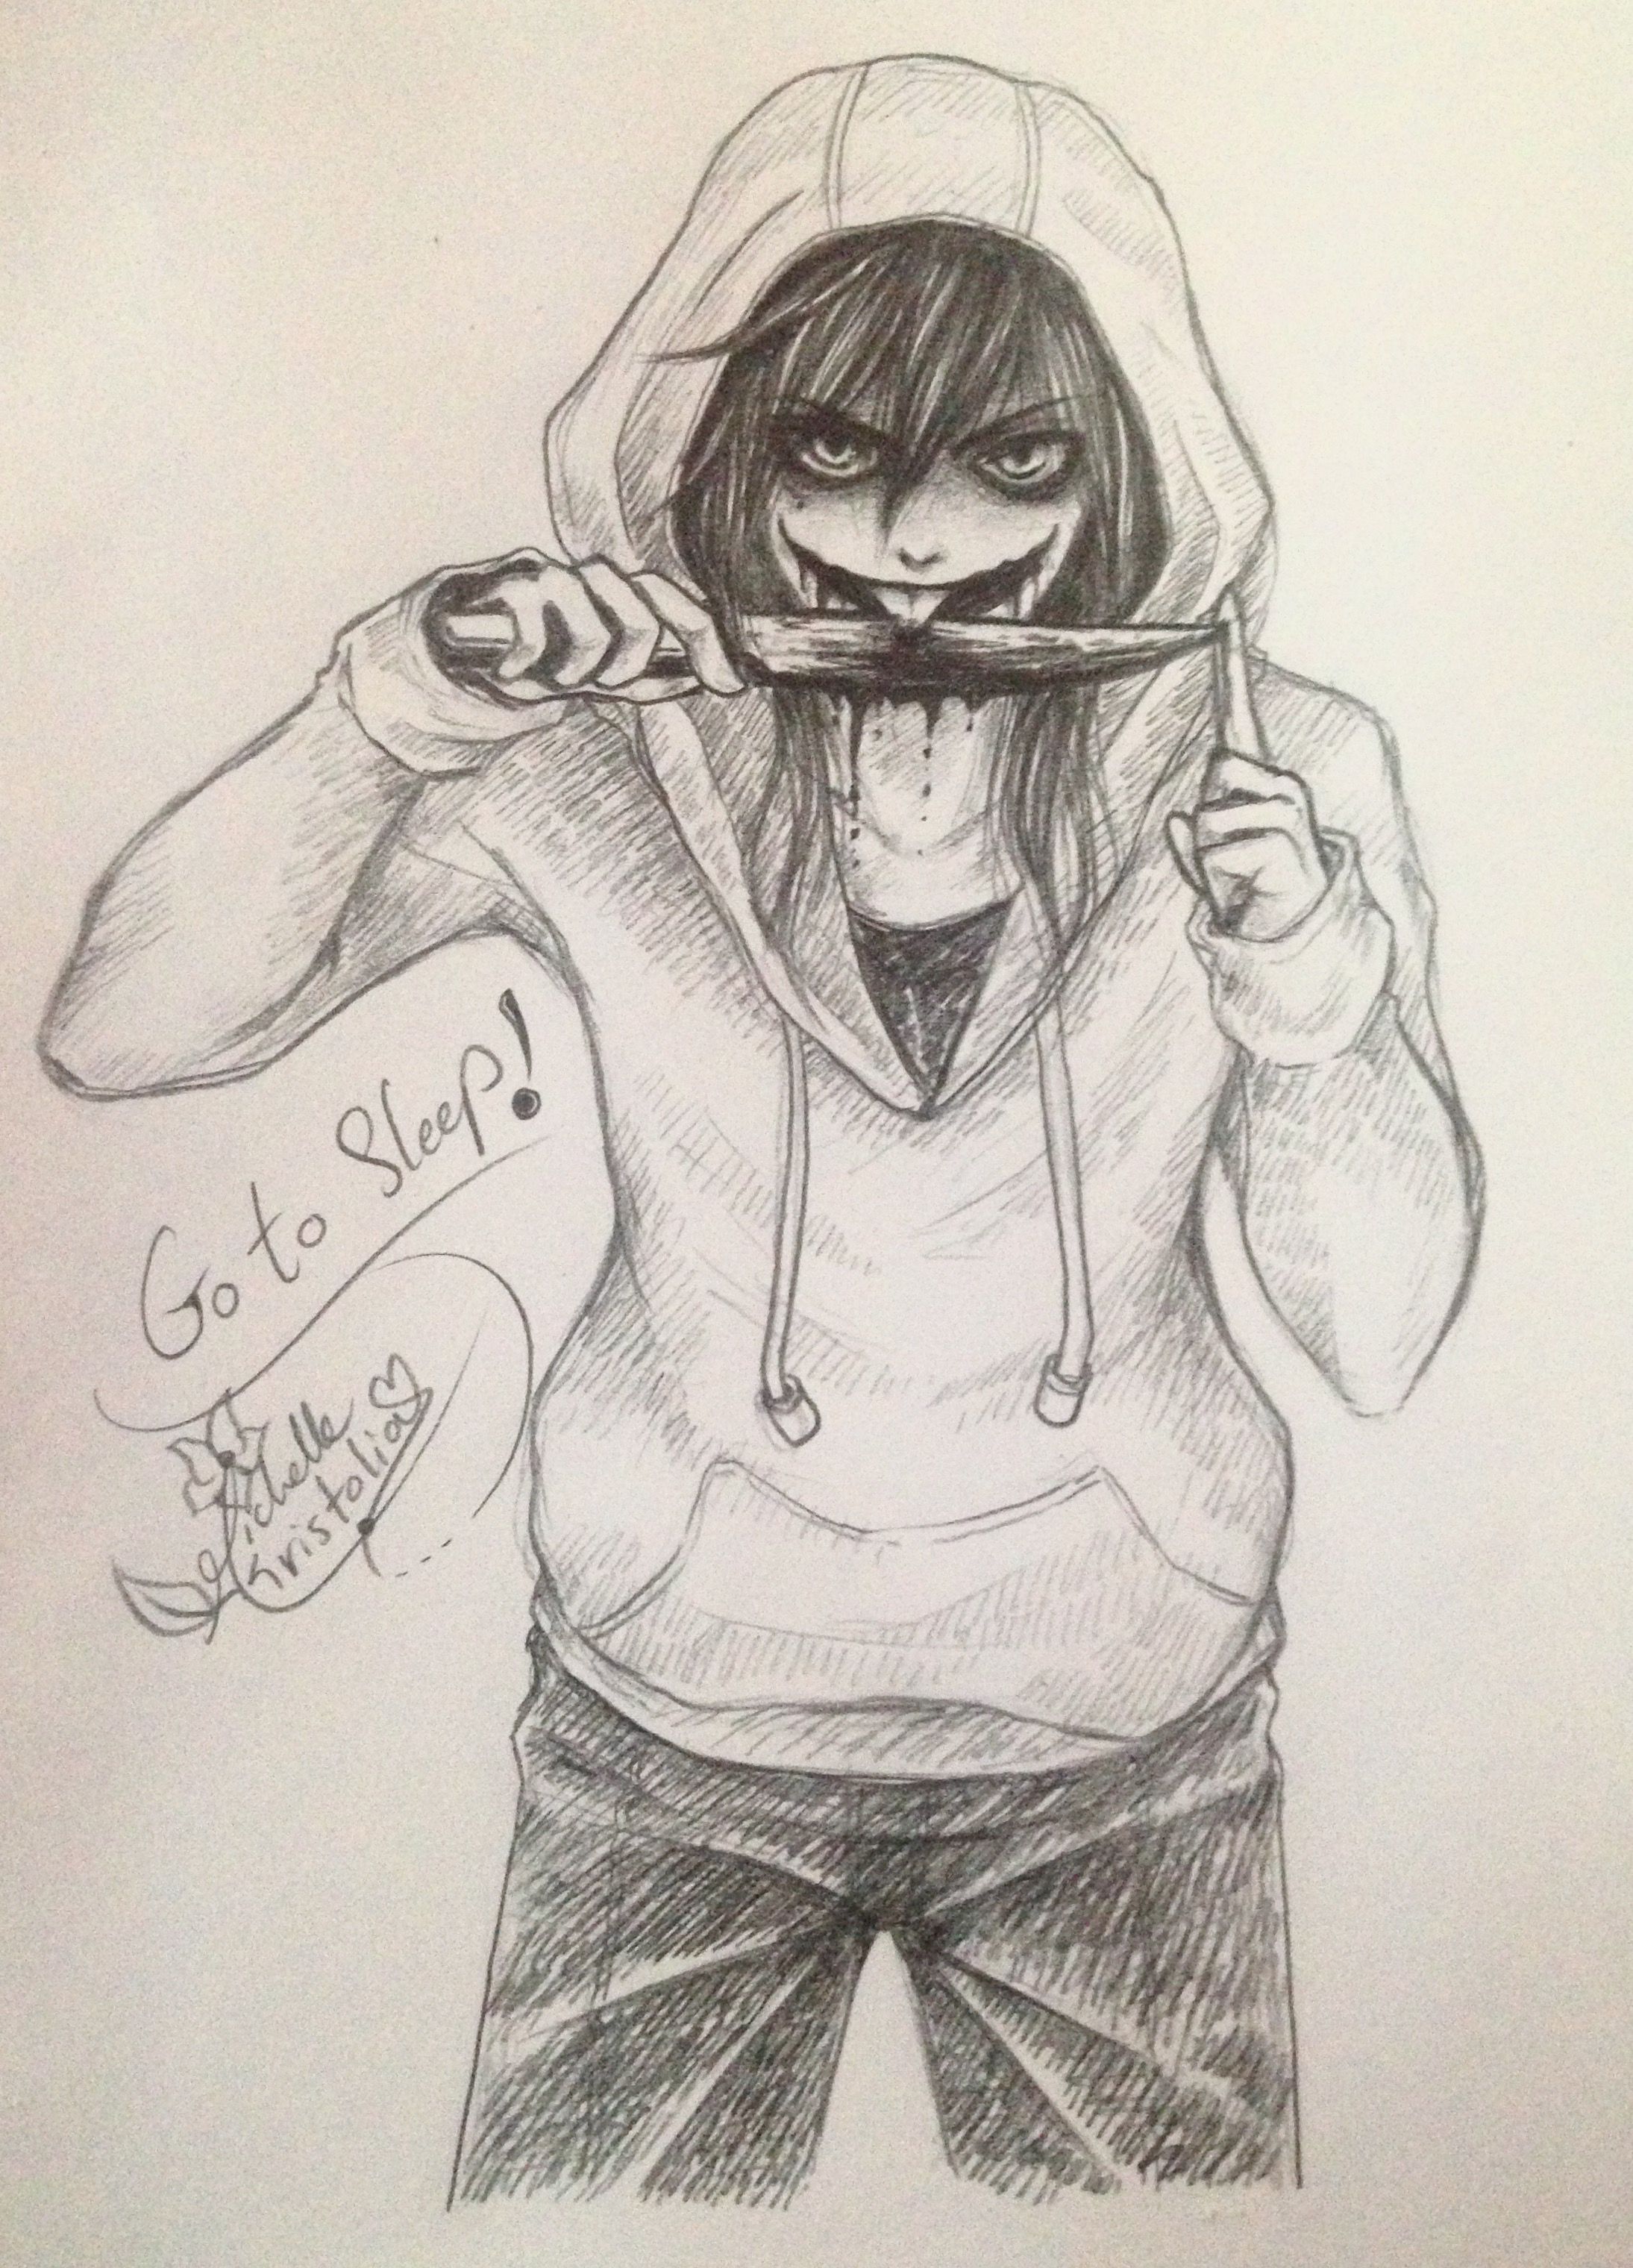 A Speedy Sketch Done By Me For The Love Jeff The Killer - Jeff The Killer.....